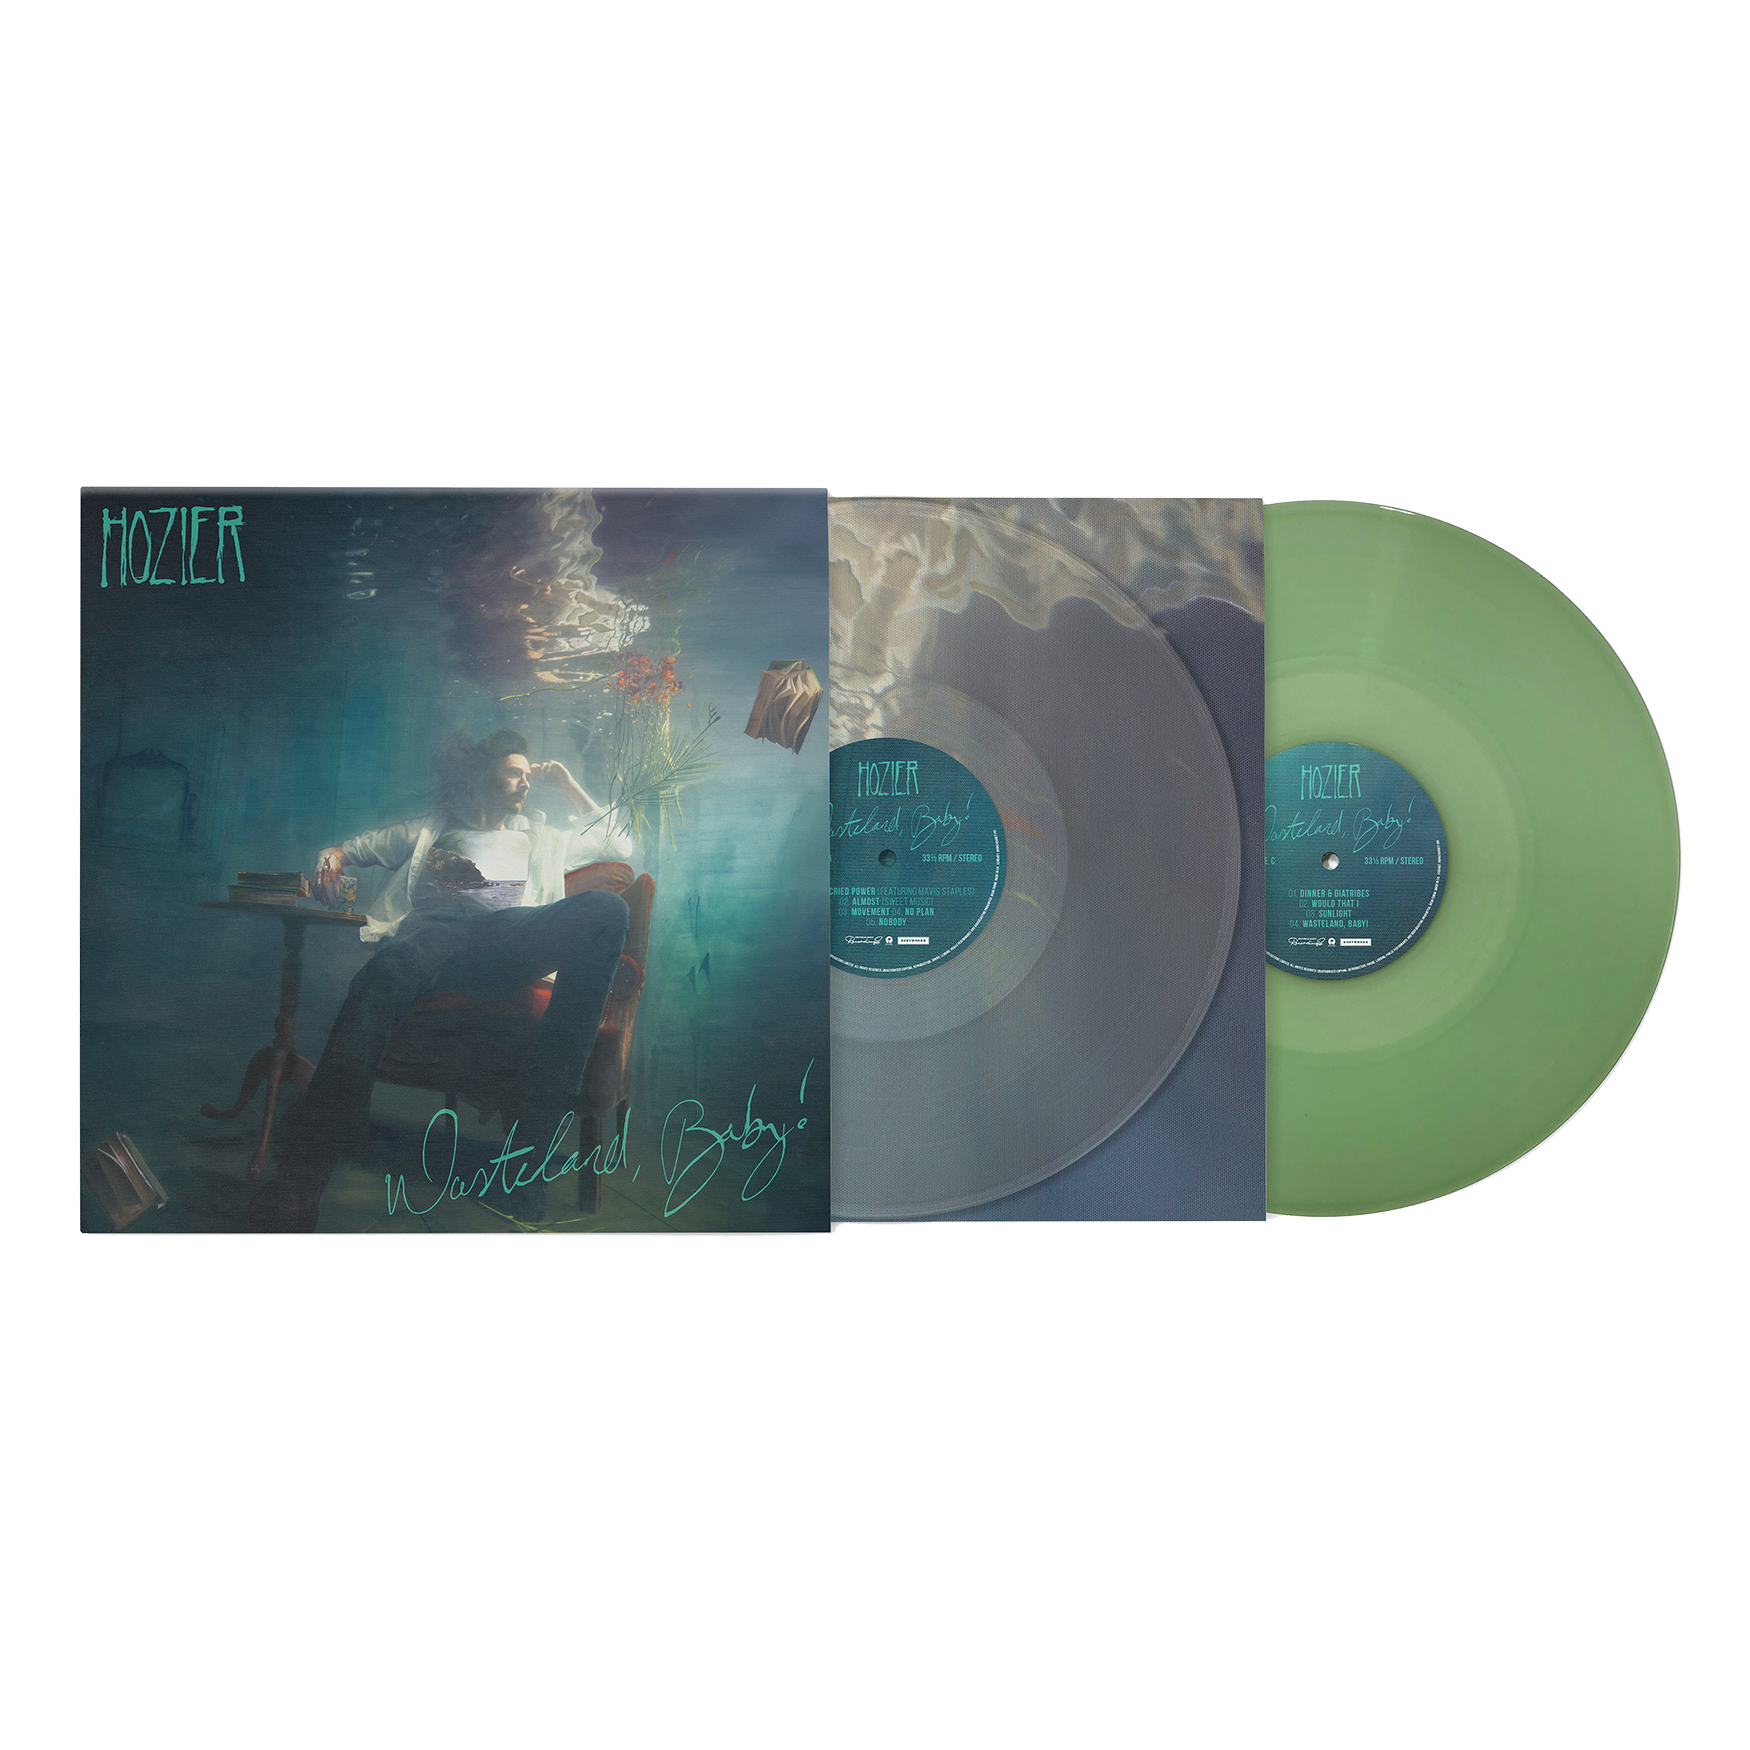 Hozier - Wasteland, Baby! Limited Ultra Clear & Transparent Green Vinyl 2LP